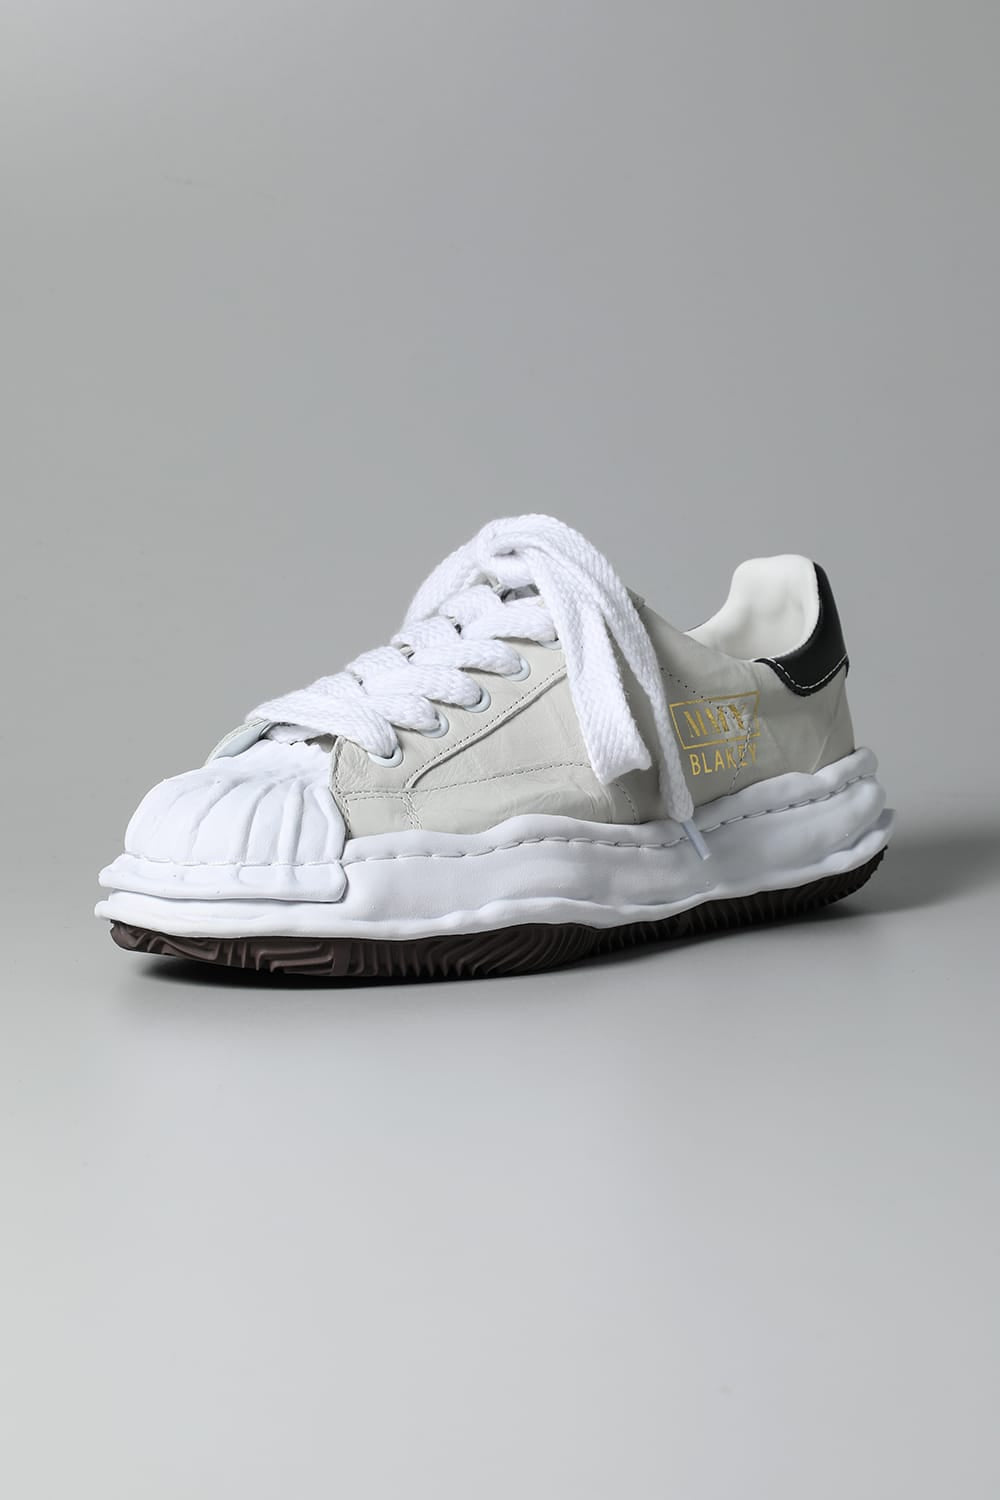 -BLAKEY Low- Original STC sole paper like leather Low-Top sneakers White